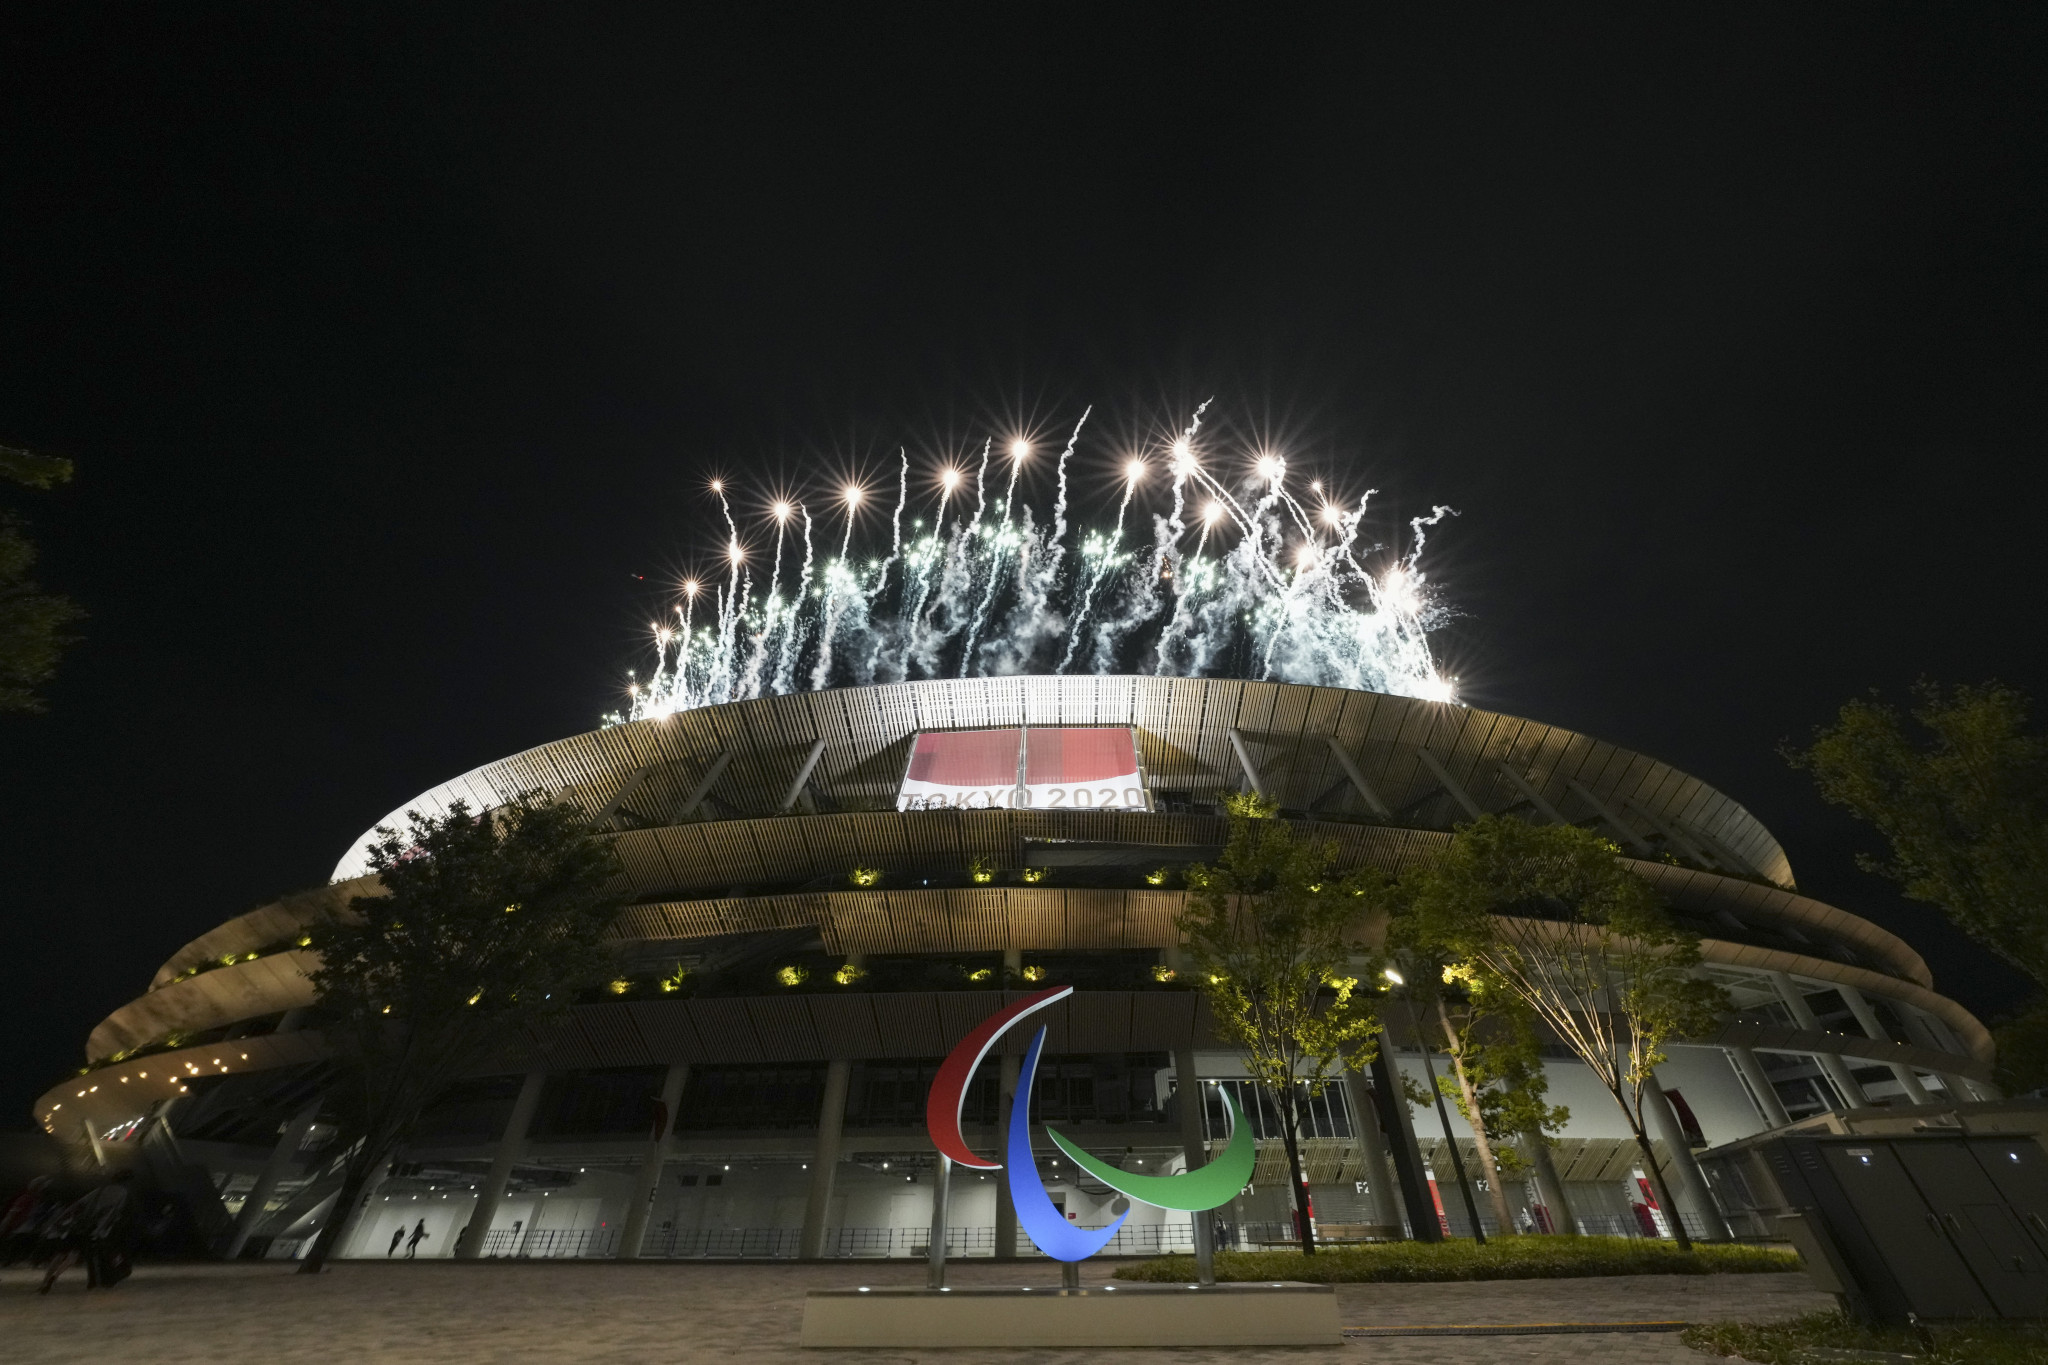 Fireworks lit up the sky above the Olympic Stadium during the Tokyo 2020 Paralympics Opening Ceremony ©Getty Images